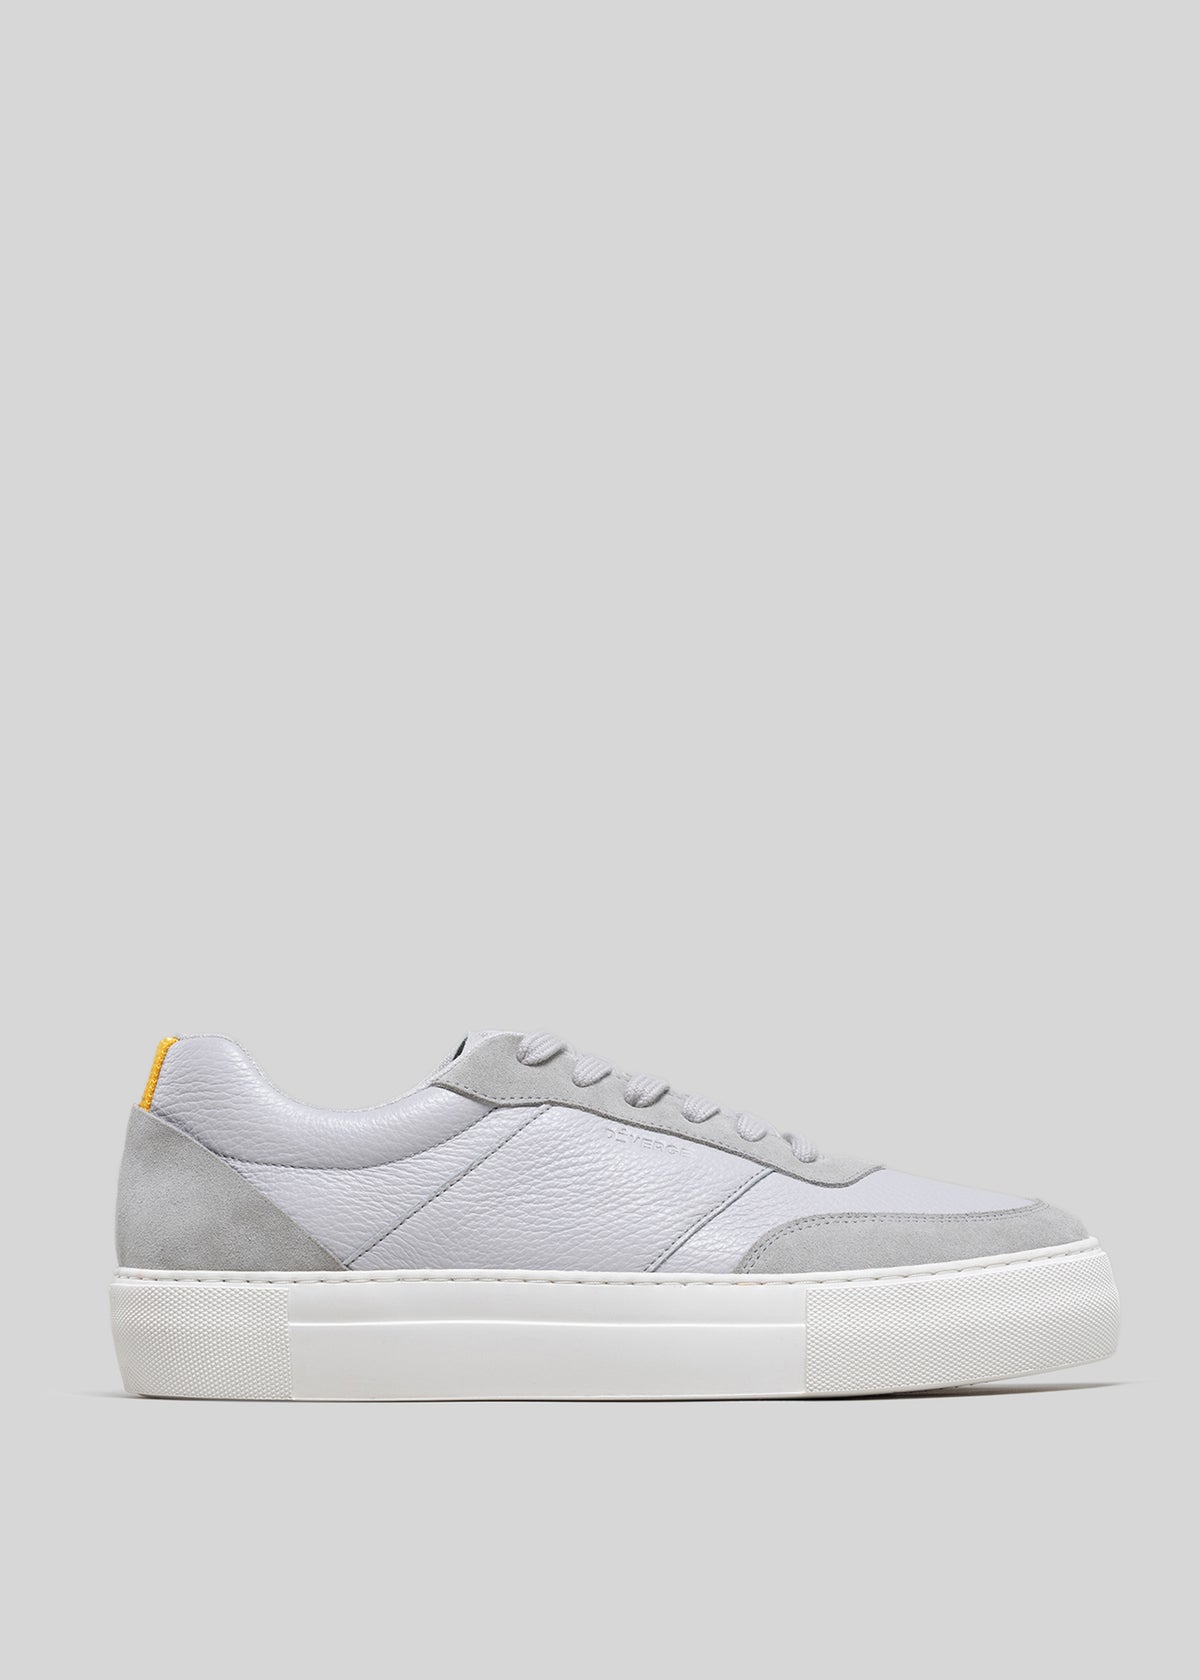 Side view of a V2 Grey low top sneaker with a white rubber sole and a small yellow tag on the heel.